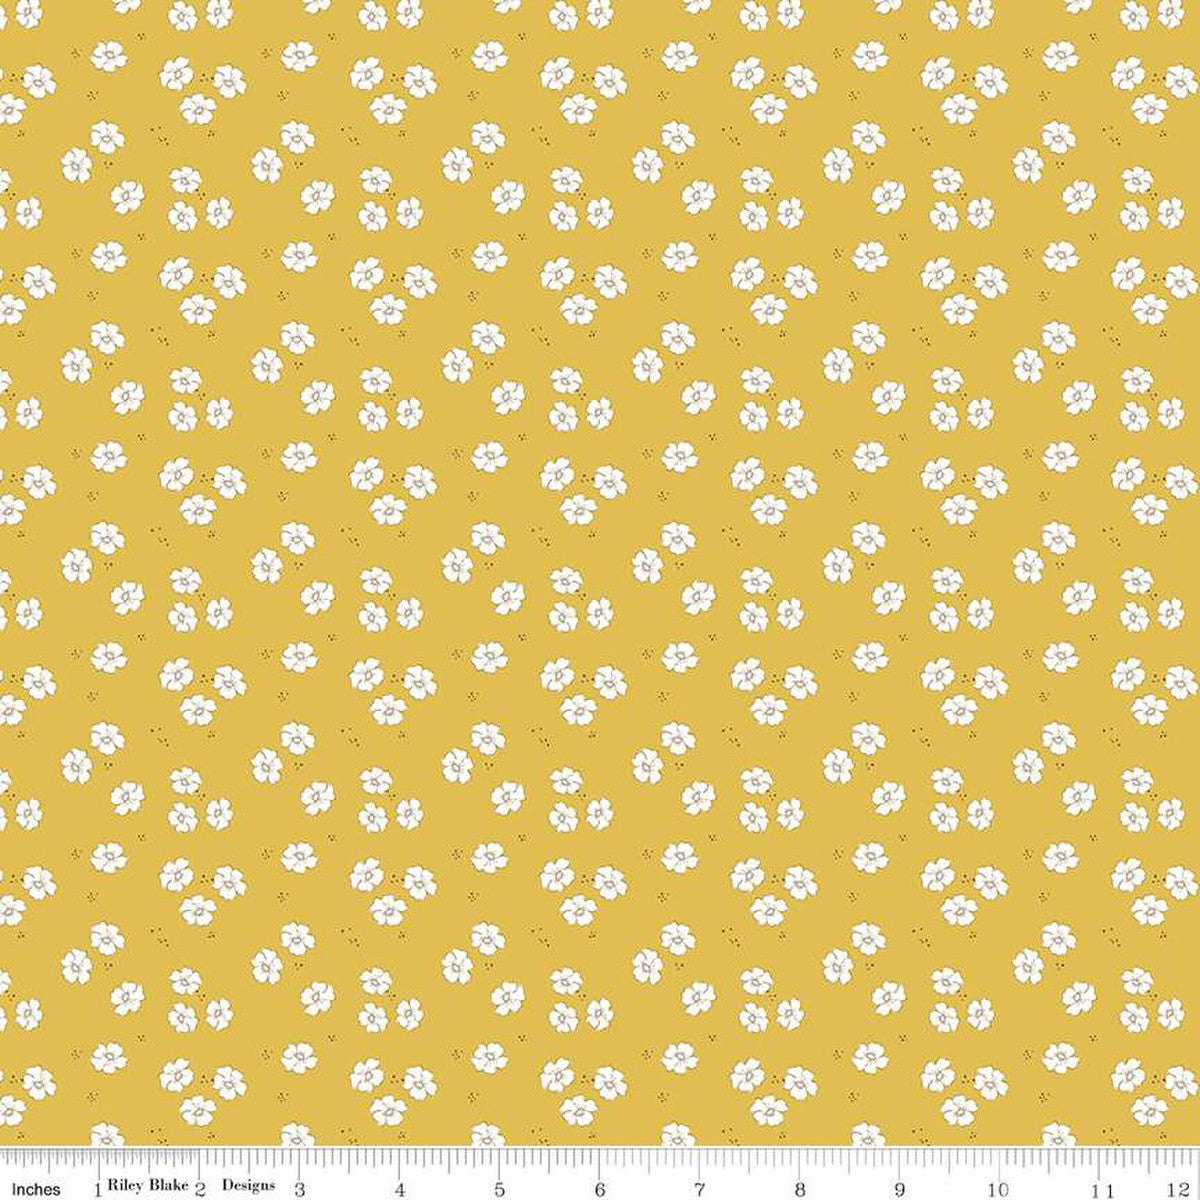 BloomBerry Flower Bed Yellow